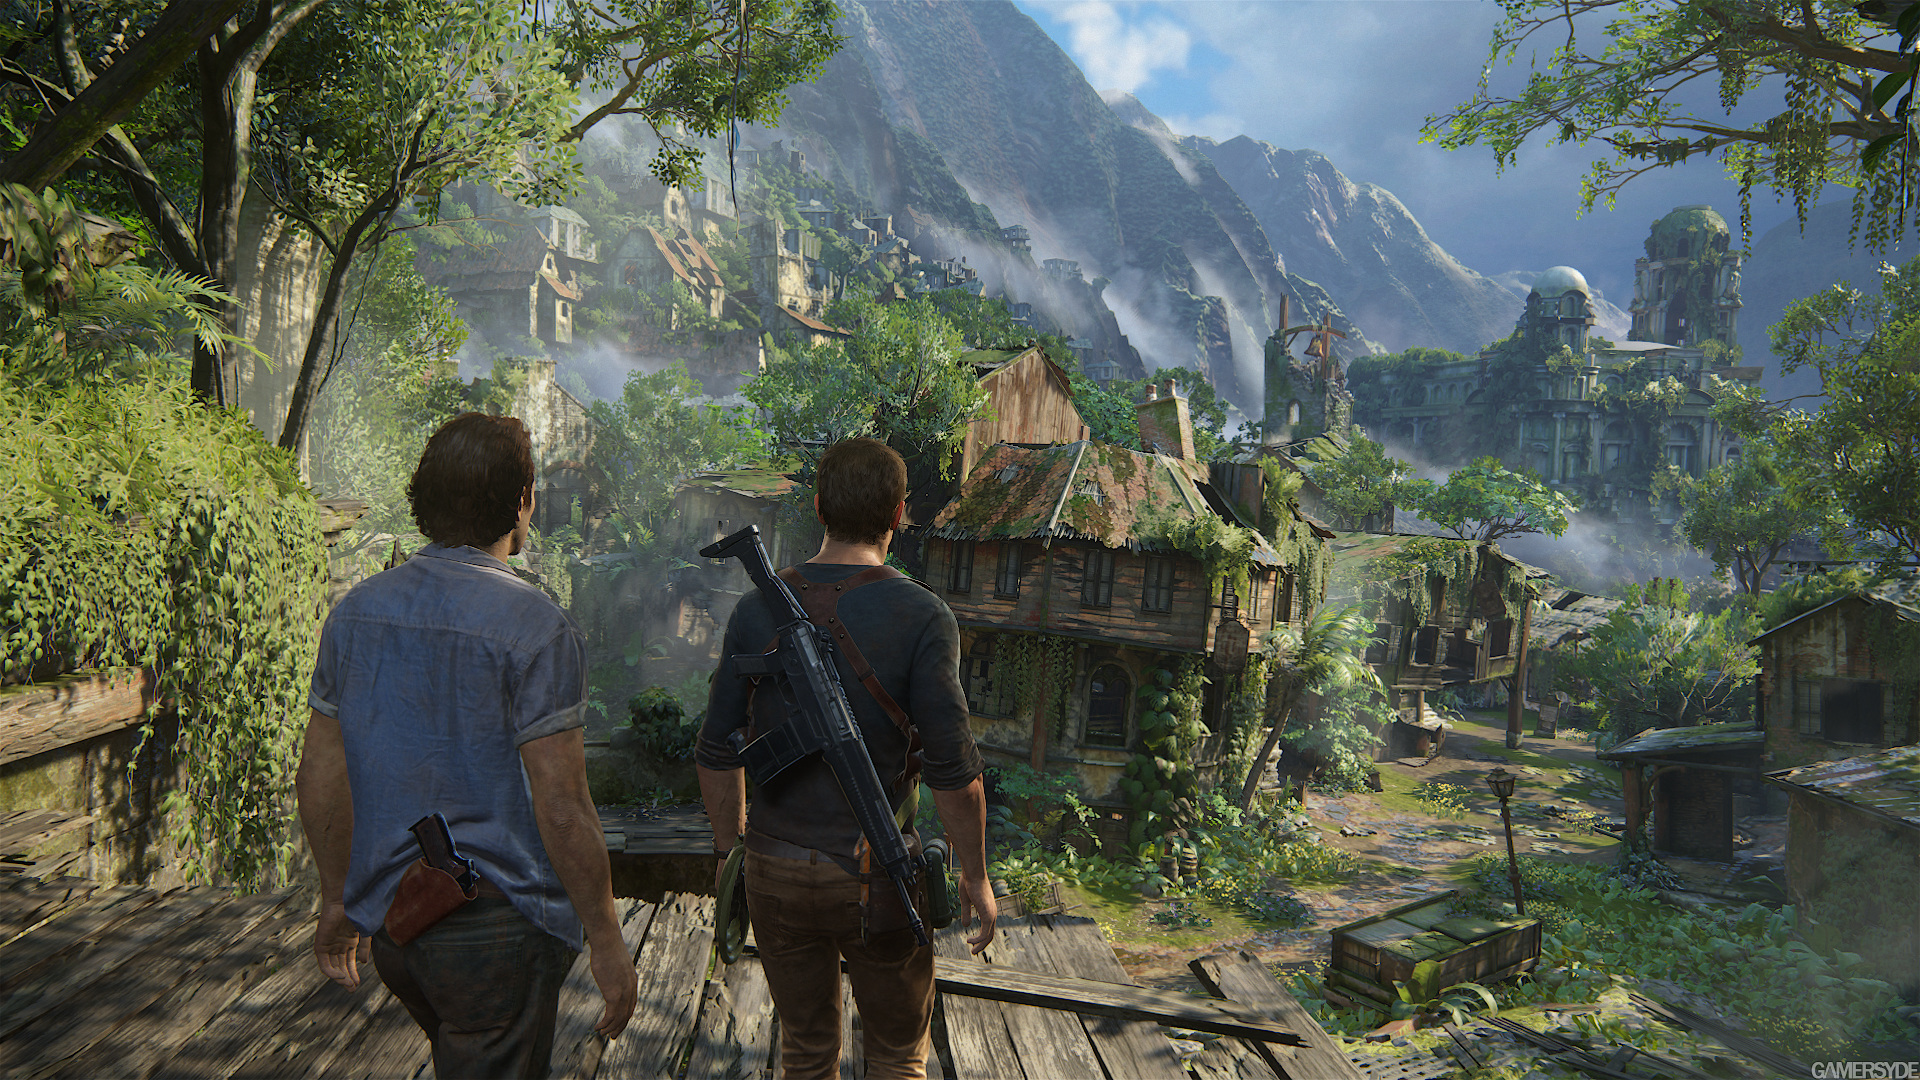 image_uncharted_4_a_thief_s_end-30961-29